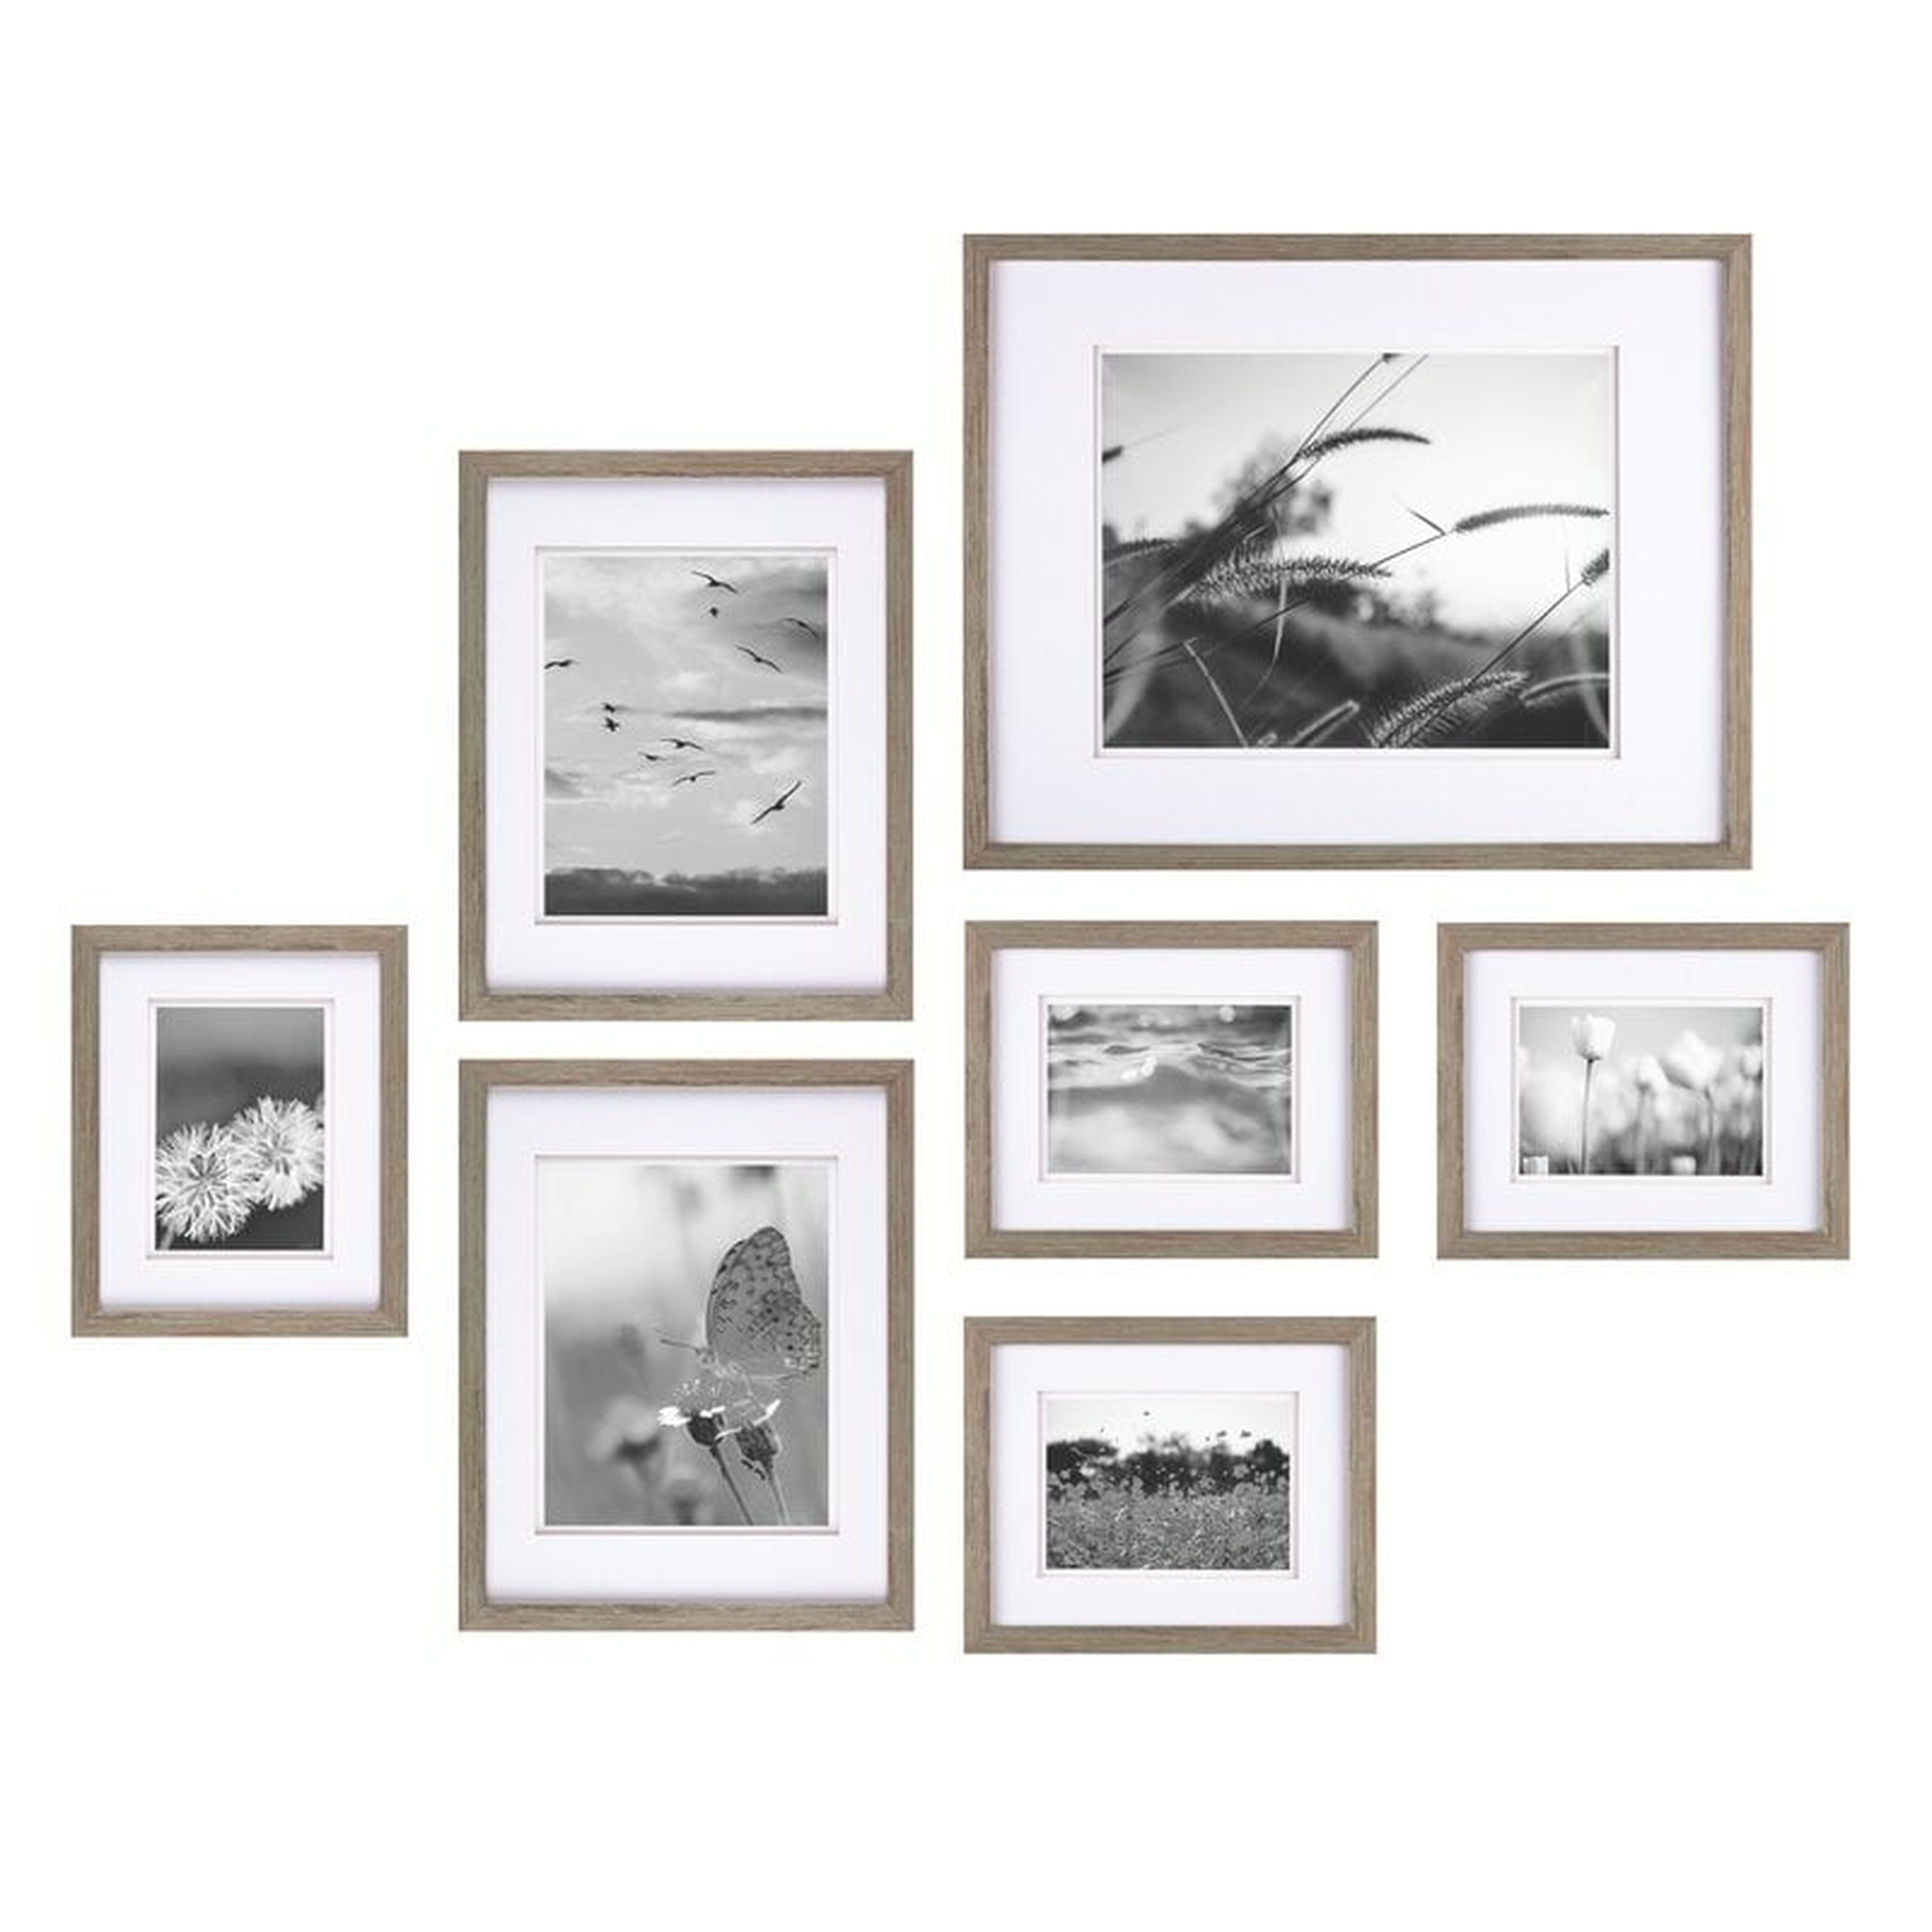 Goin 7 Piece Build a Gallery Wall Picture Frame Set - Wayfair